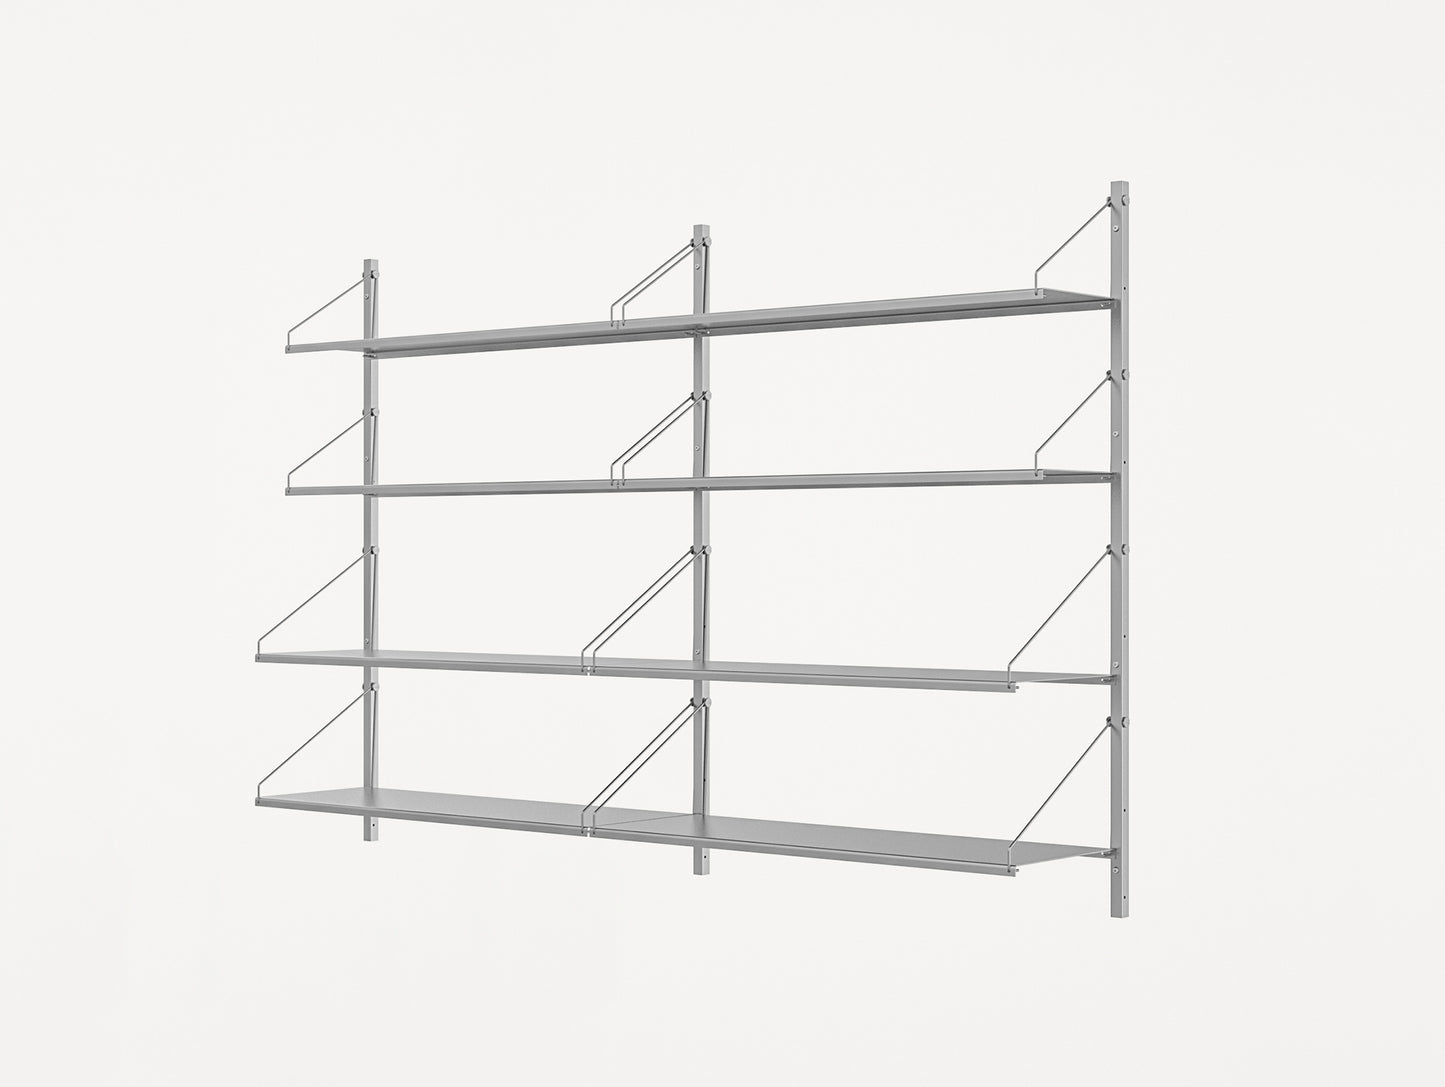 Shelf Library Stainless Steel by Frama - H1084 cm /  Double Section (w80 shelves)